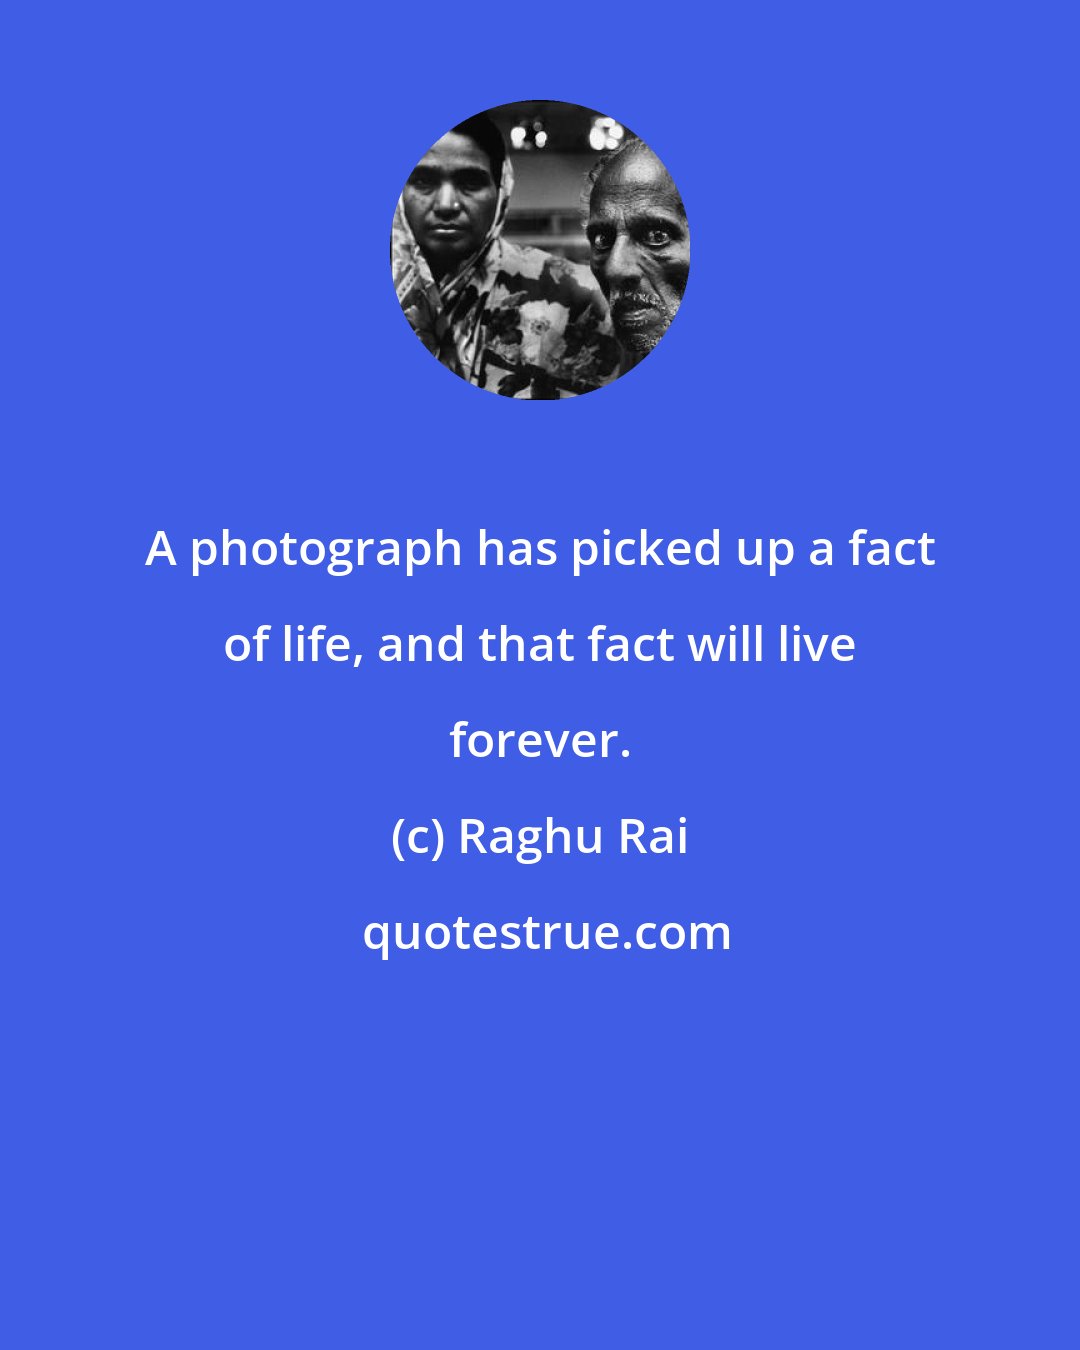 Raghu Rai: A photograph has picked up a fact of life, and that fact will live forever.